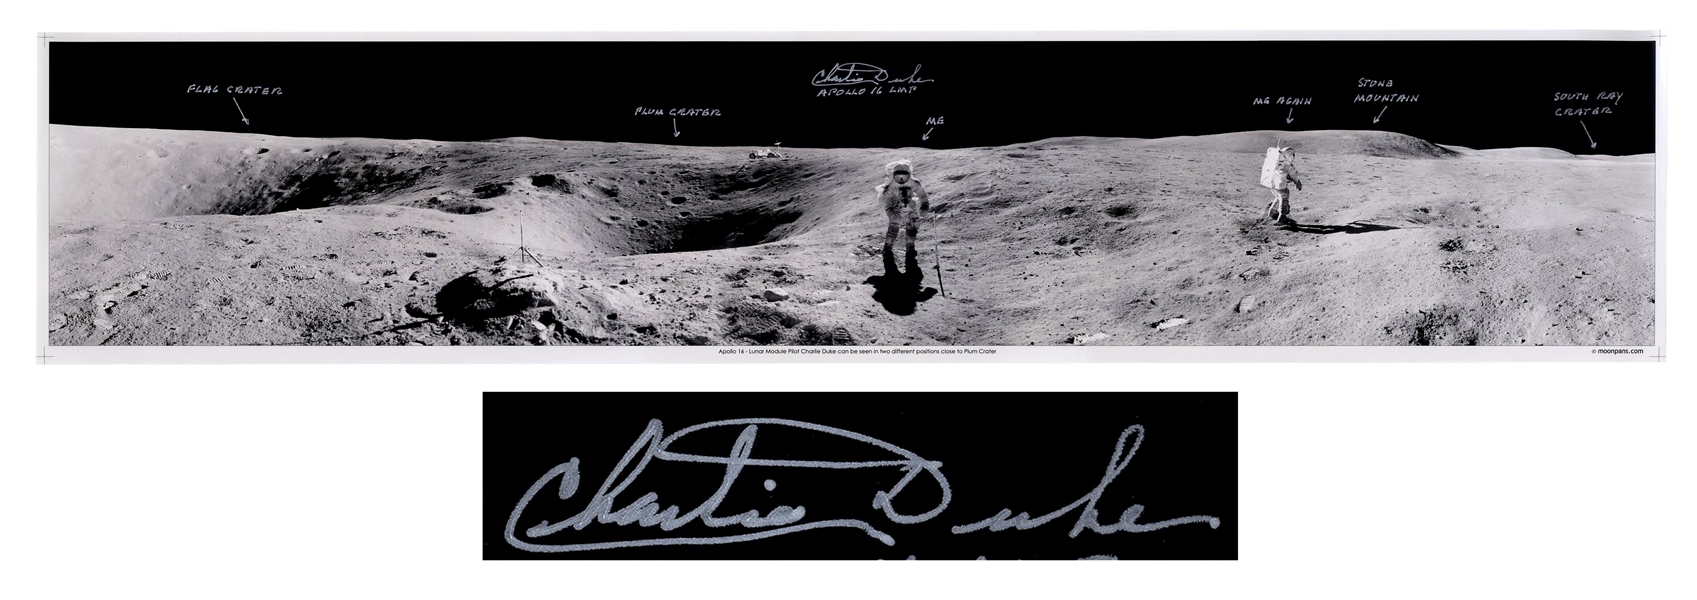 Charlie Duke Signed 40'' Panoramic Photo of the Lunar Surface During the Apollo 16 Mission